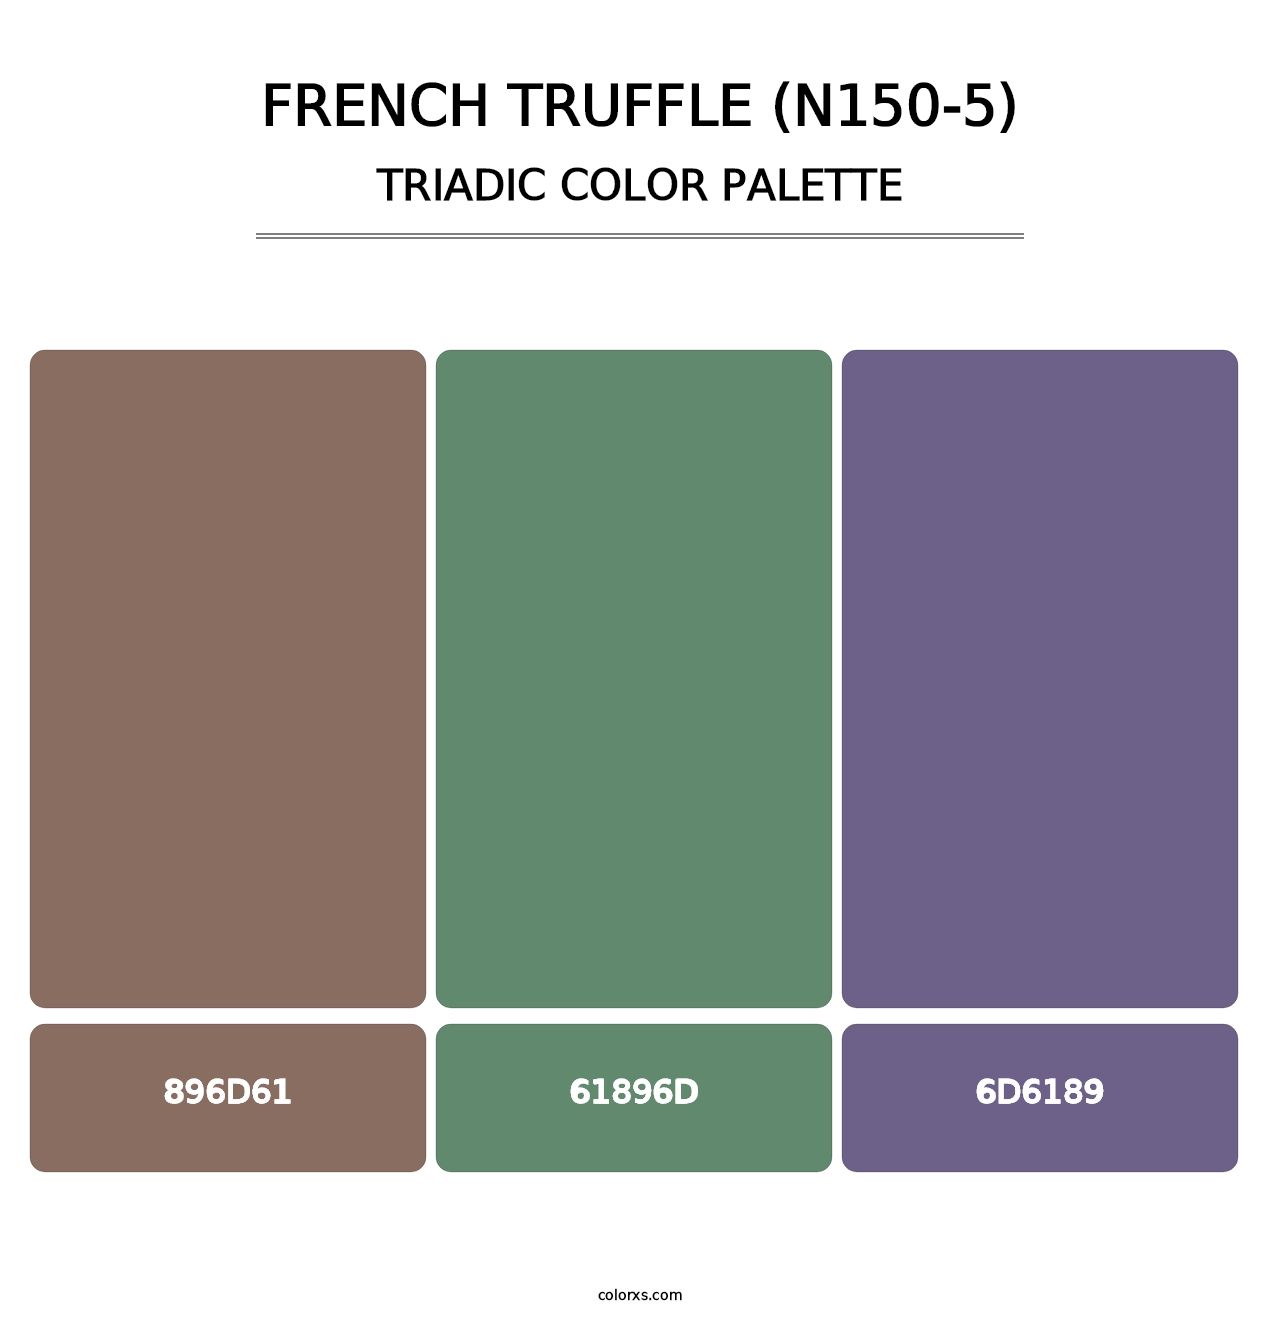 French Truffle (N150-5) - Triadic Color Palette